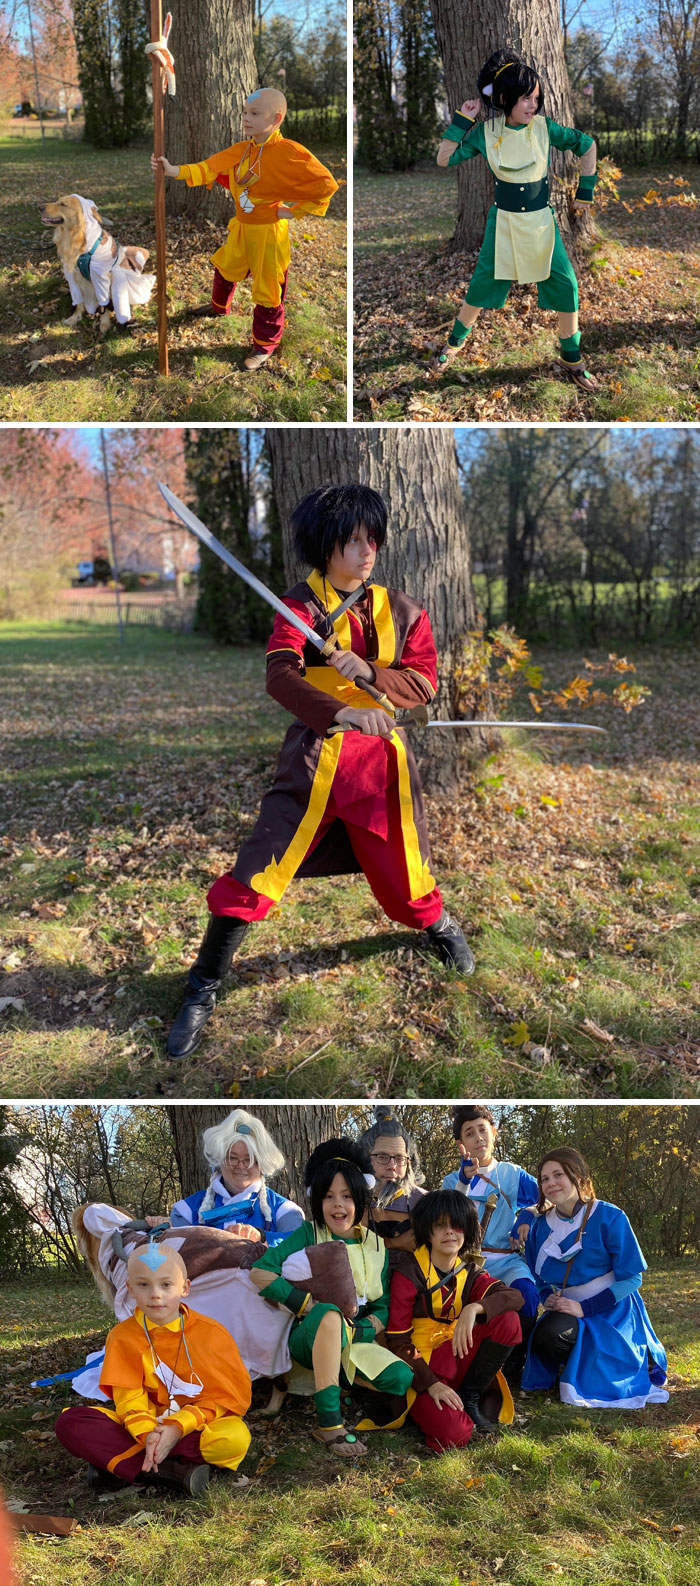 My Family’s Avatar The Last Airbender Costumes